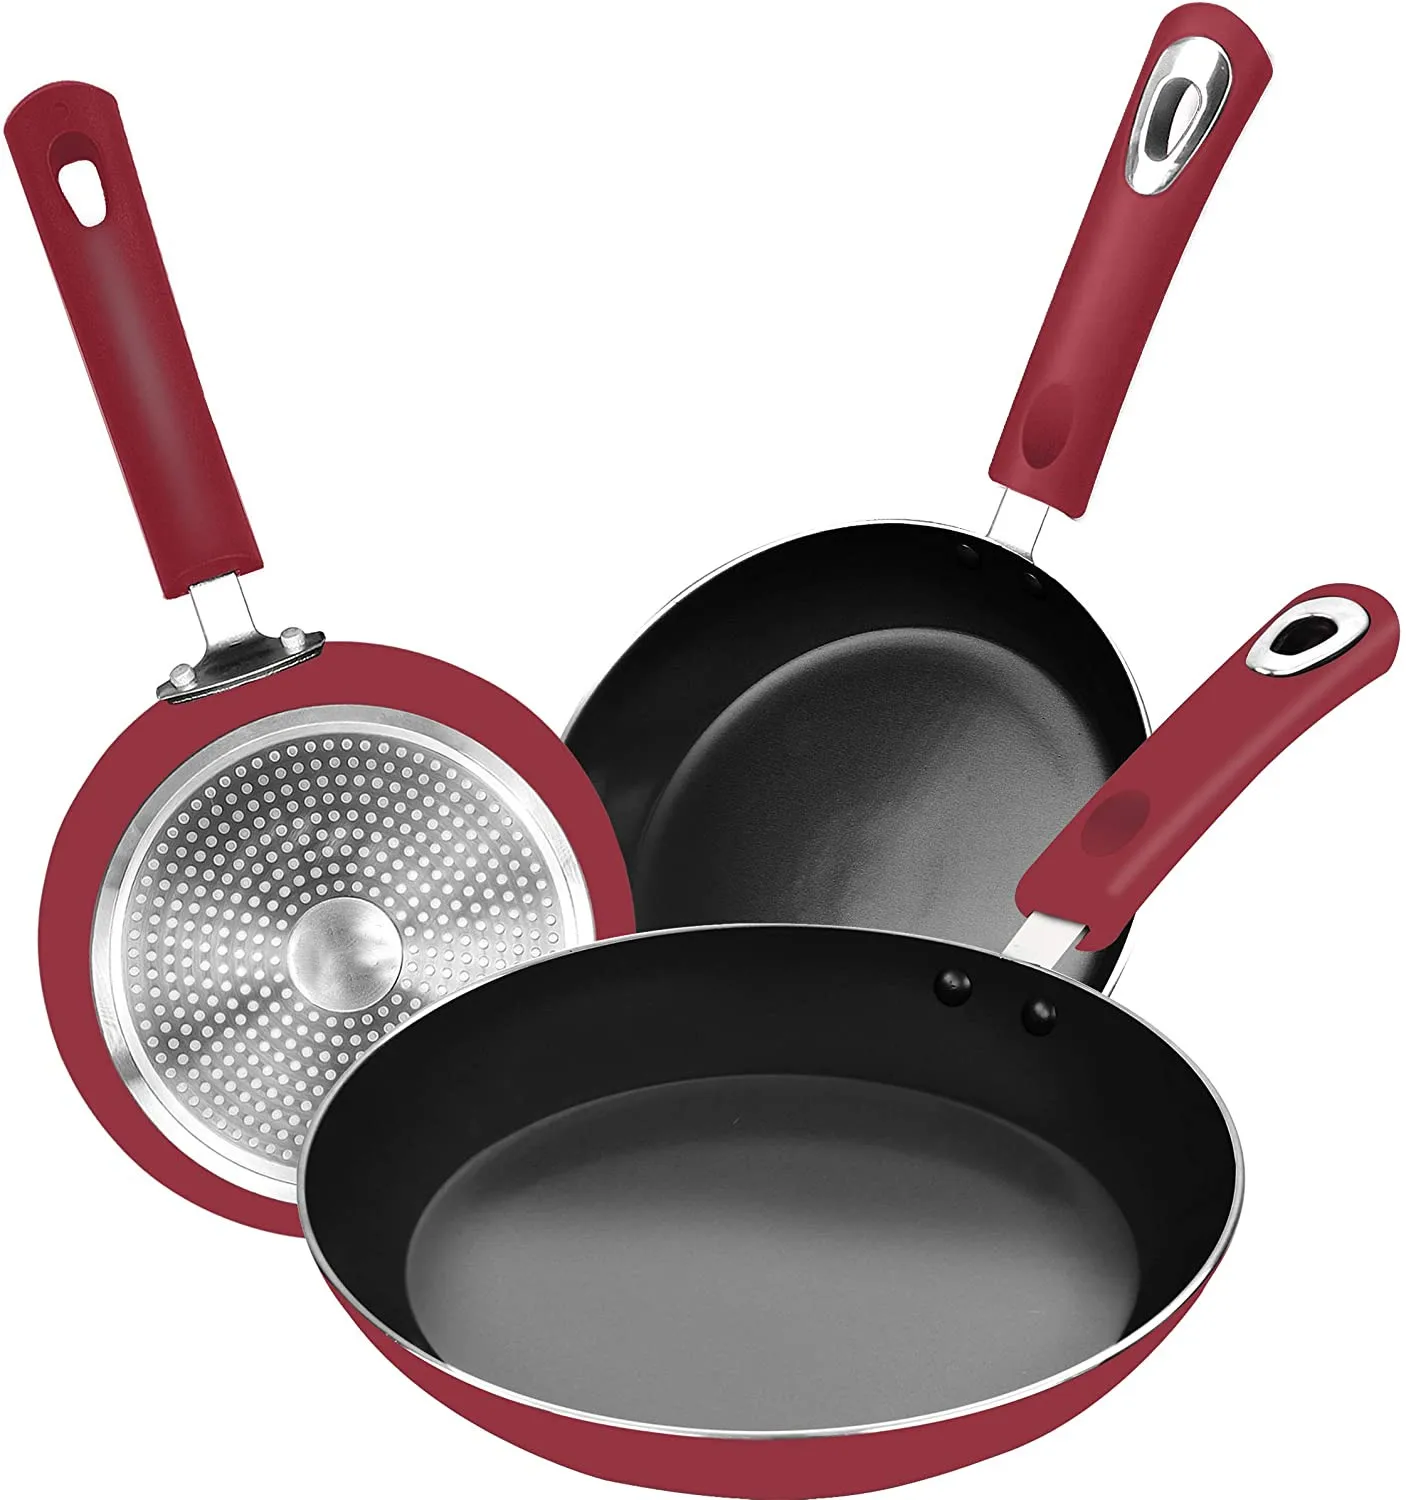 Kitchen Nonstick Frying Pan Set   20 Piece Induction Bottom   20 Inches,20.20  Inches And 20 Inches red black   Buy Non Stick Cookware Set,Marble Fry ...